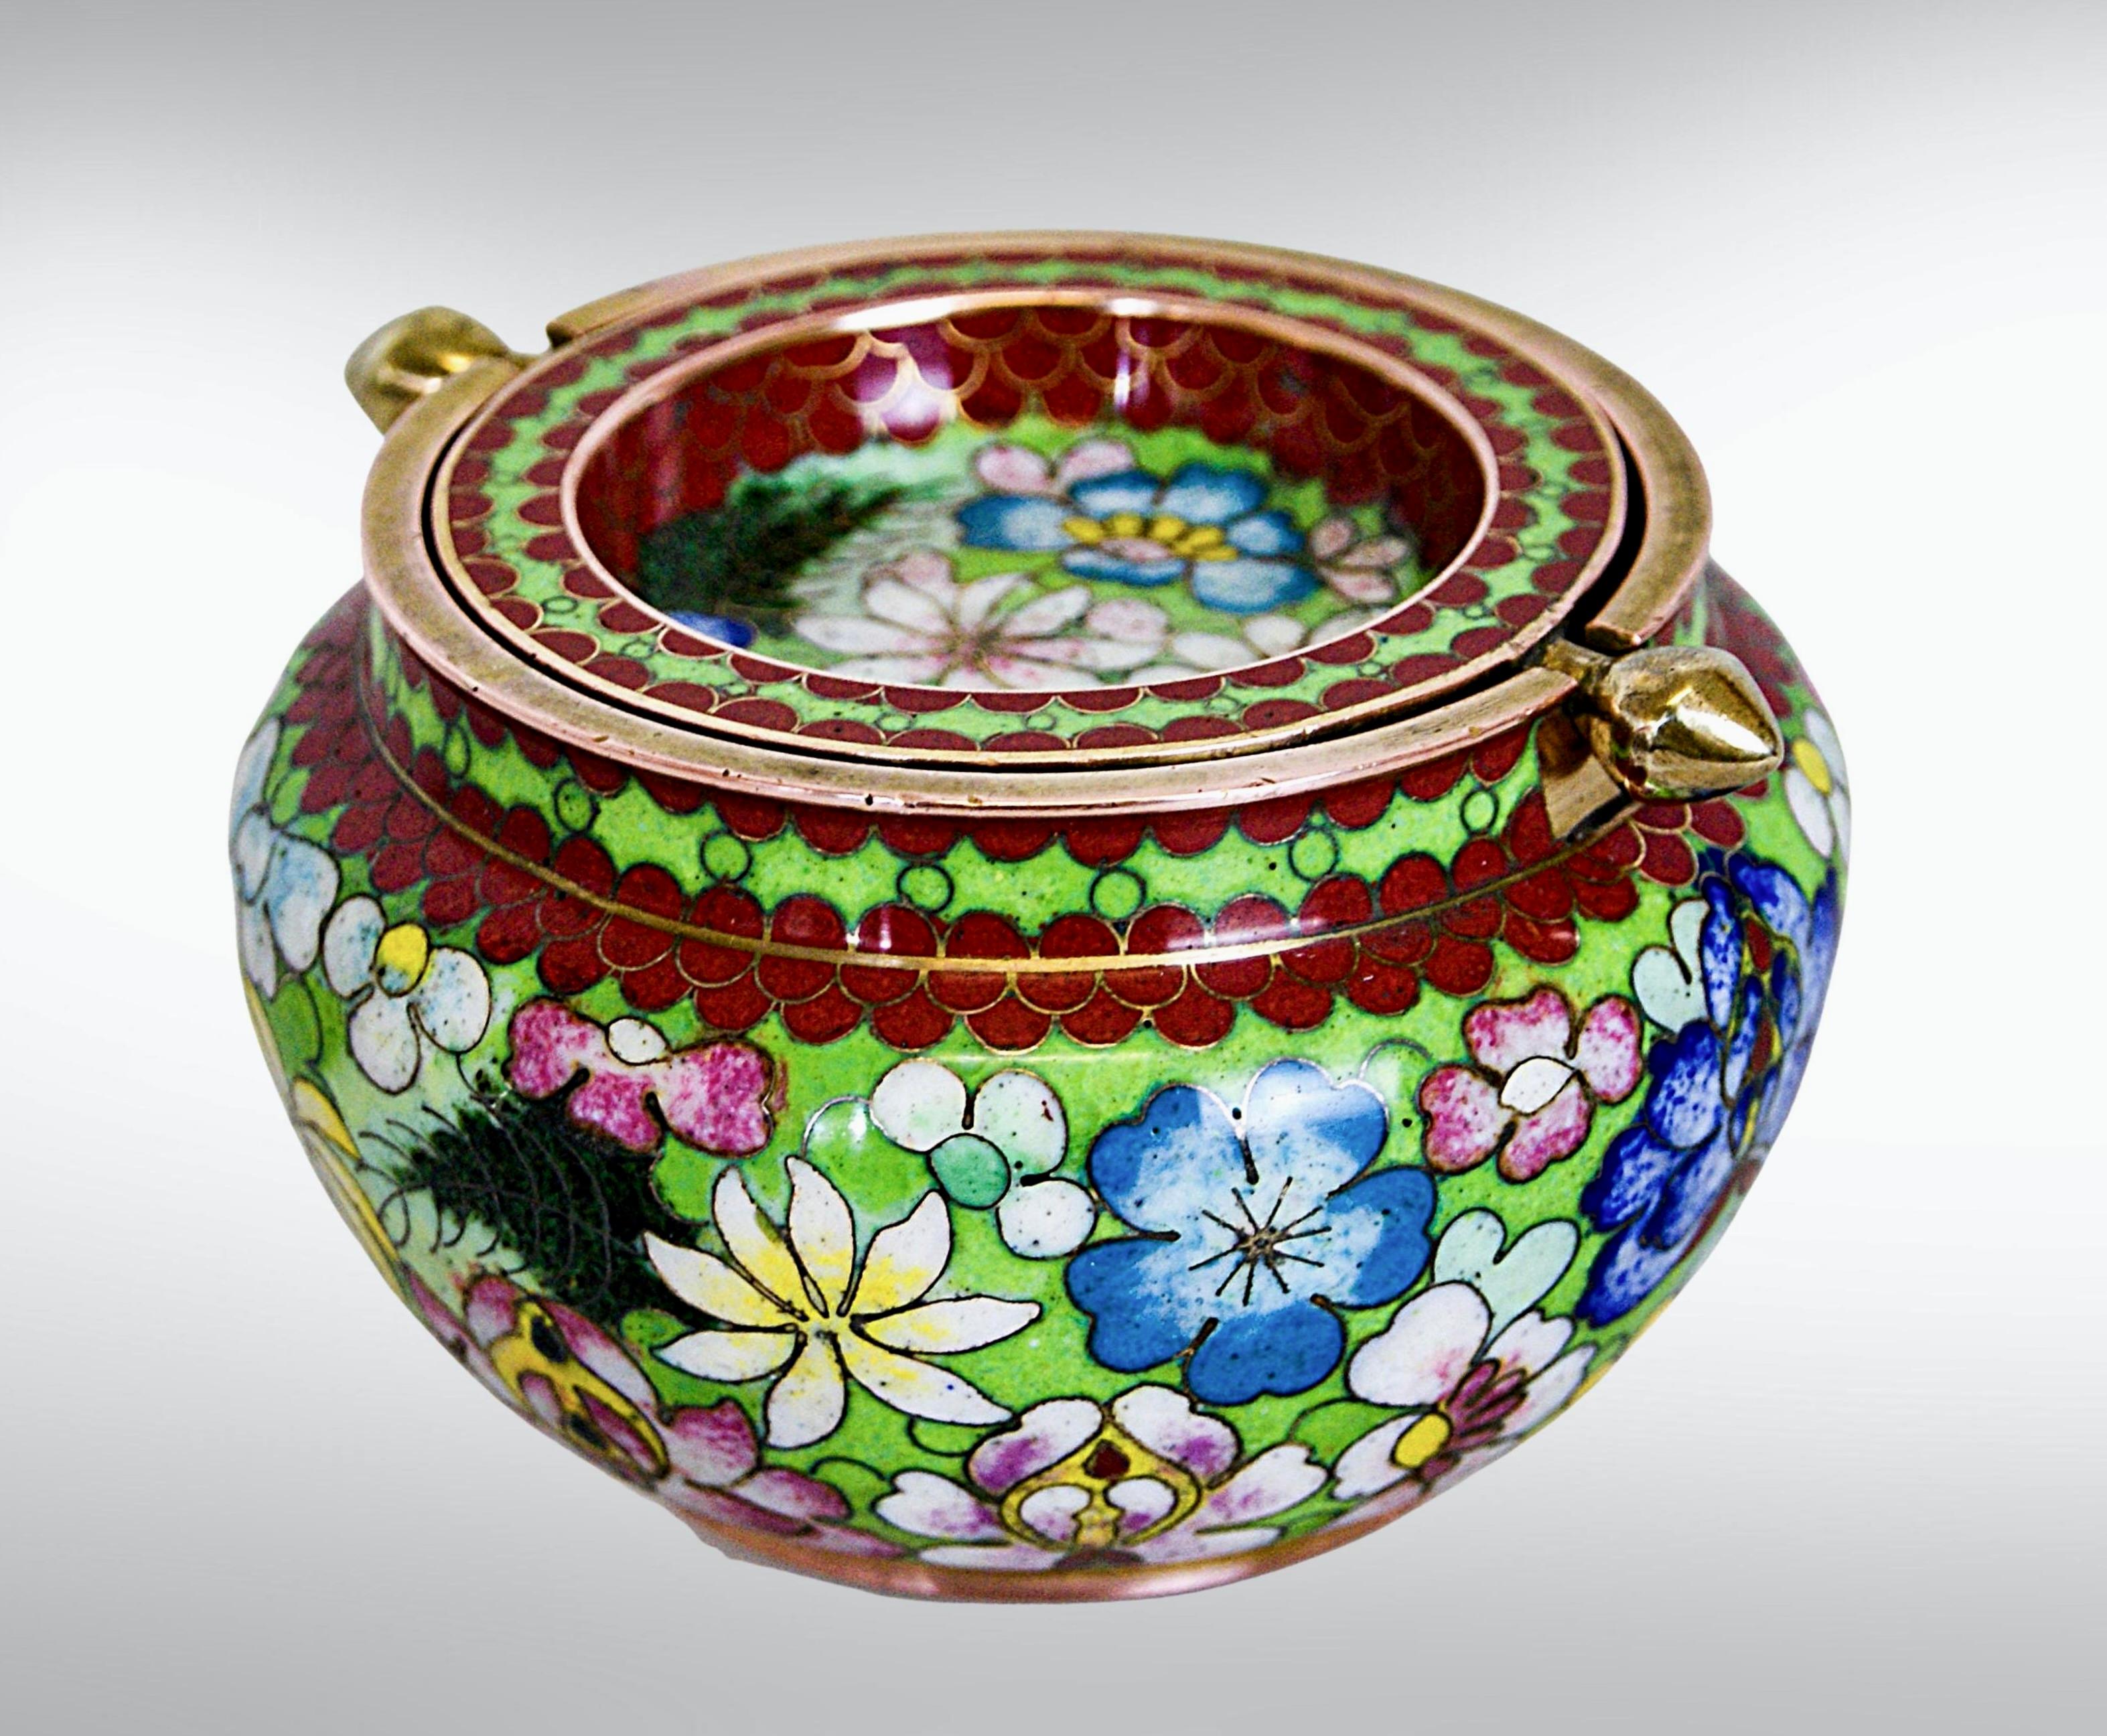 Lovely cloisonné on brass and copper bowl with graduated drop lid.
Hand painted floral enamelled lidded bowl in vibrant colours.
The lid has extended edges with a drop to the rim of the bowl for easy opening and closing. 
With enamelled cobalt